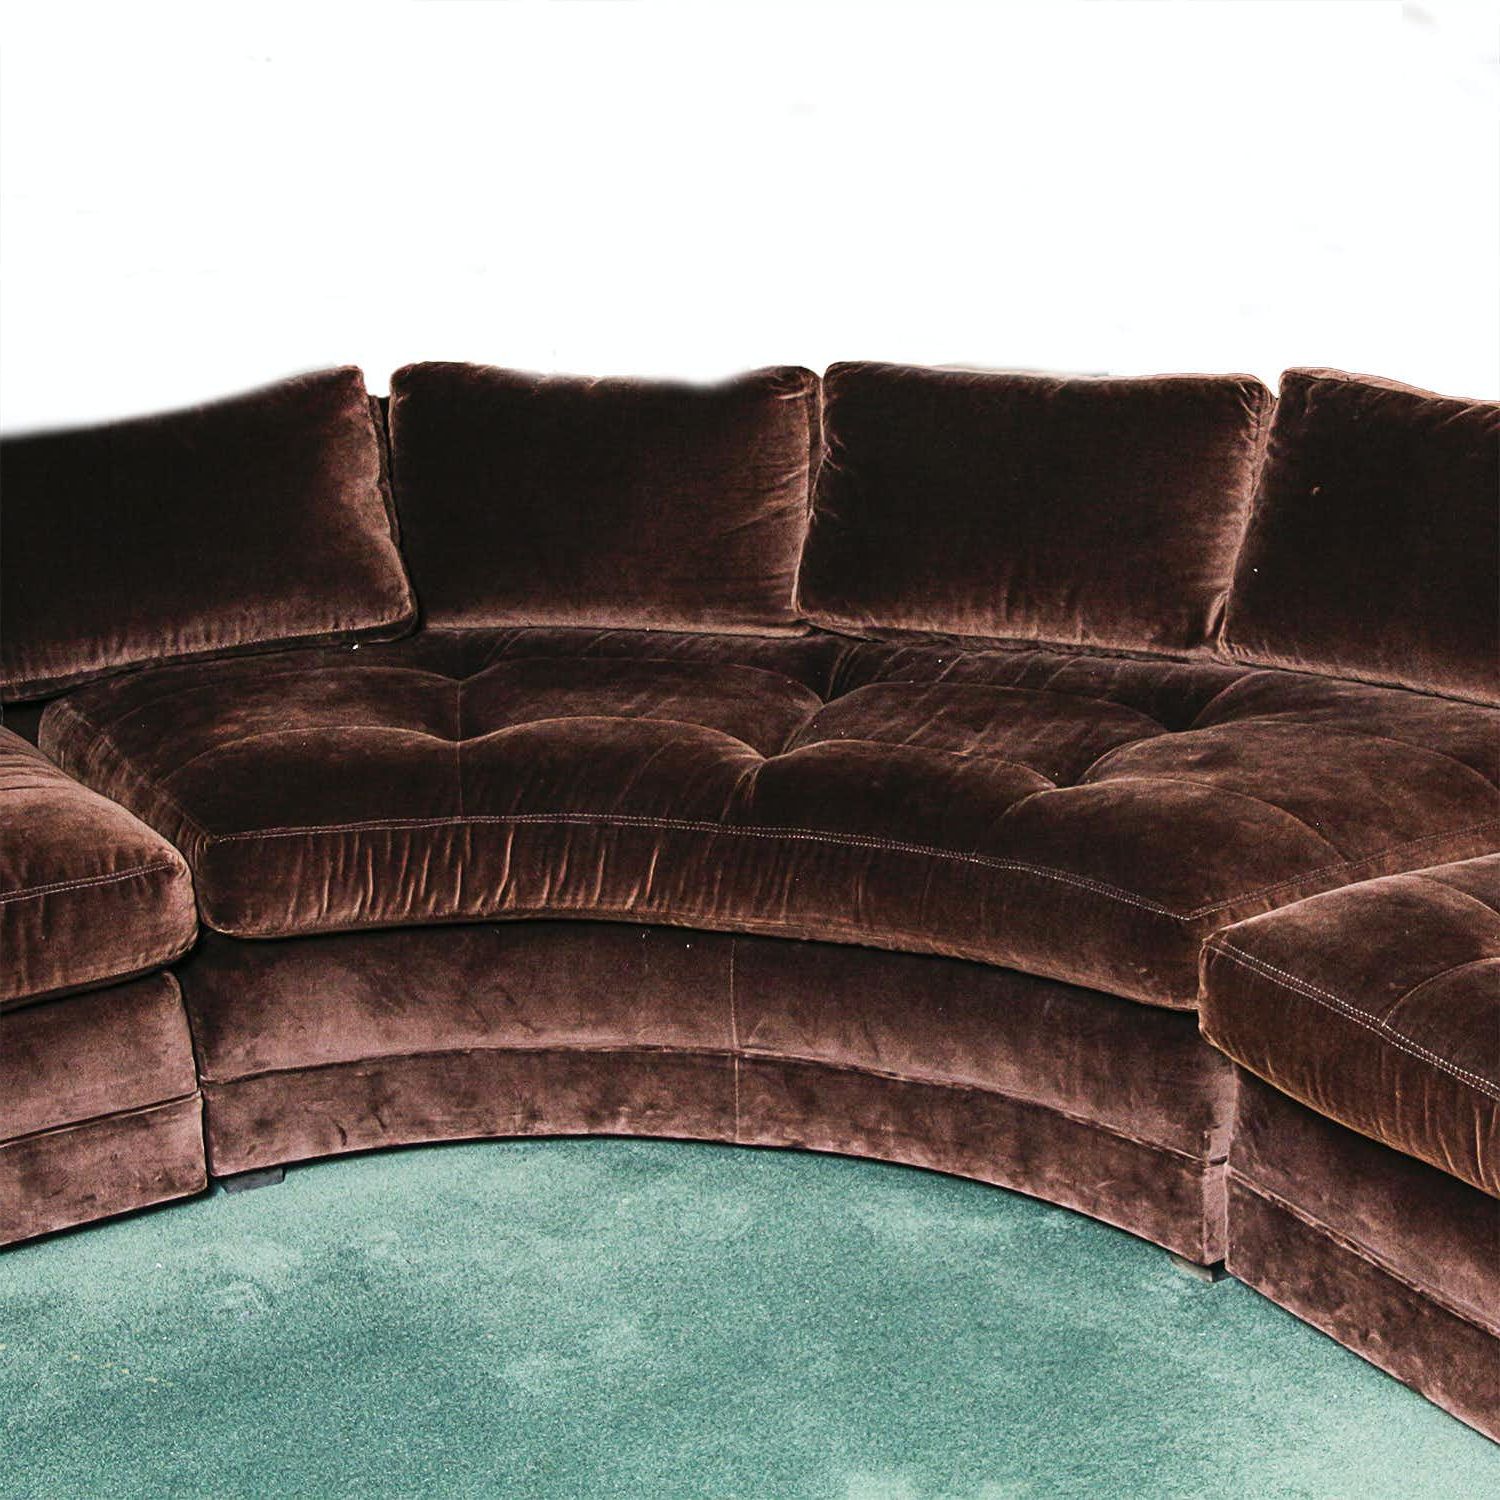 Newest Chocolate Brown Velvet Upholstered Sectional Sofa : Ebth Within Sofas In Chocolate Brown (View 11 of 15)